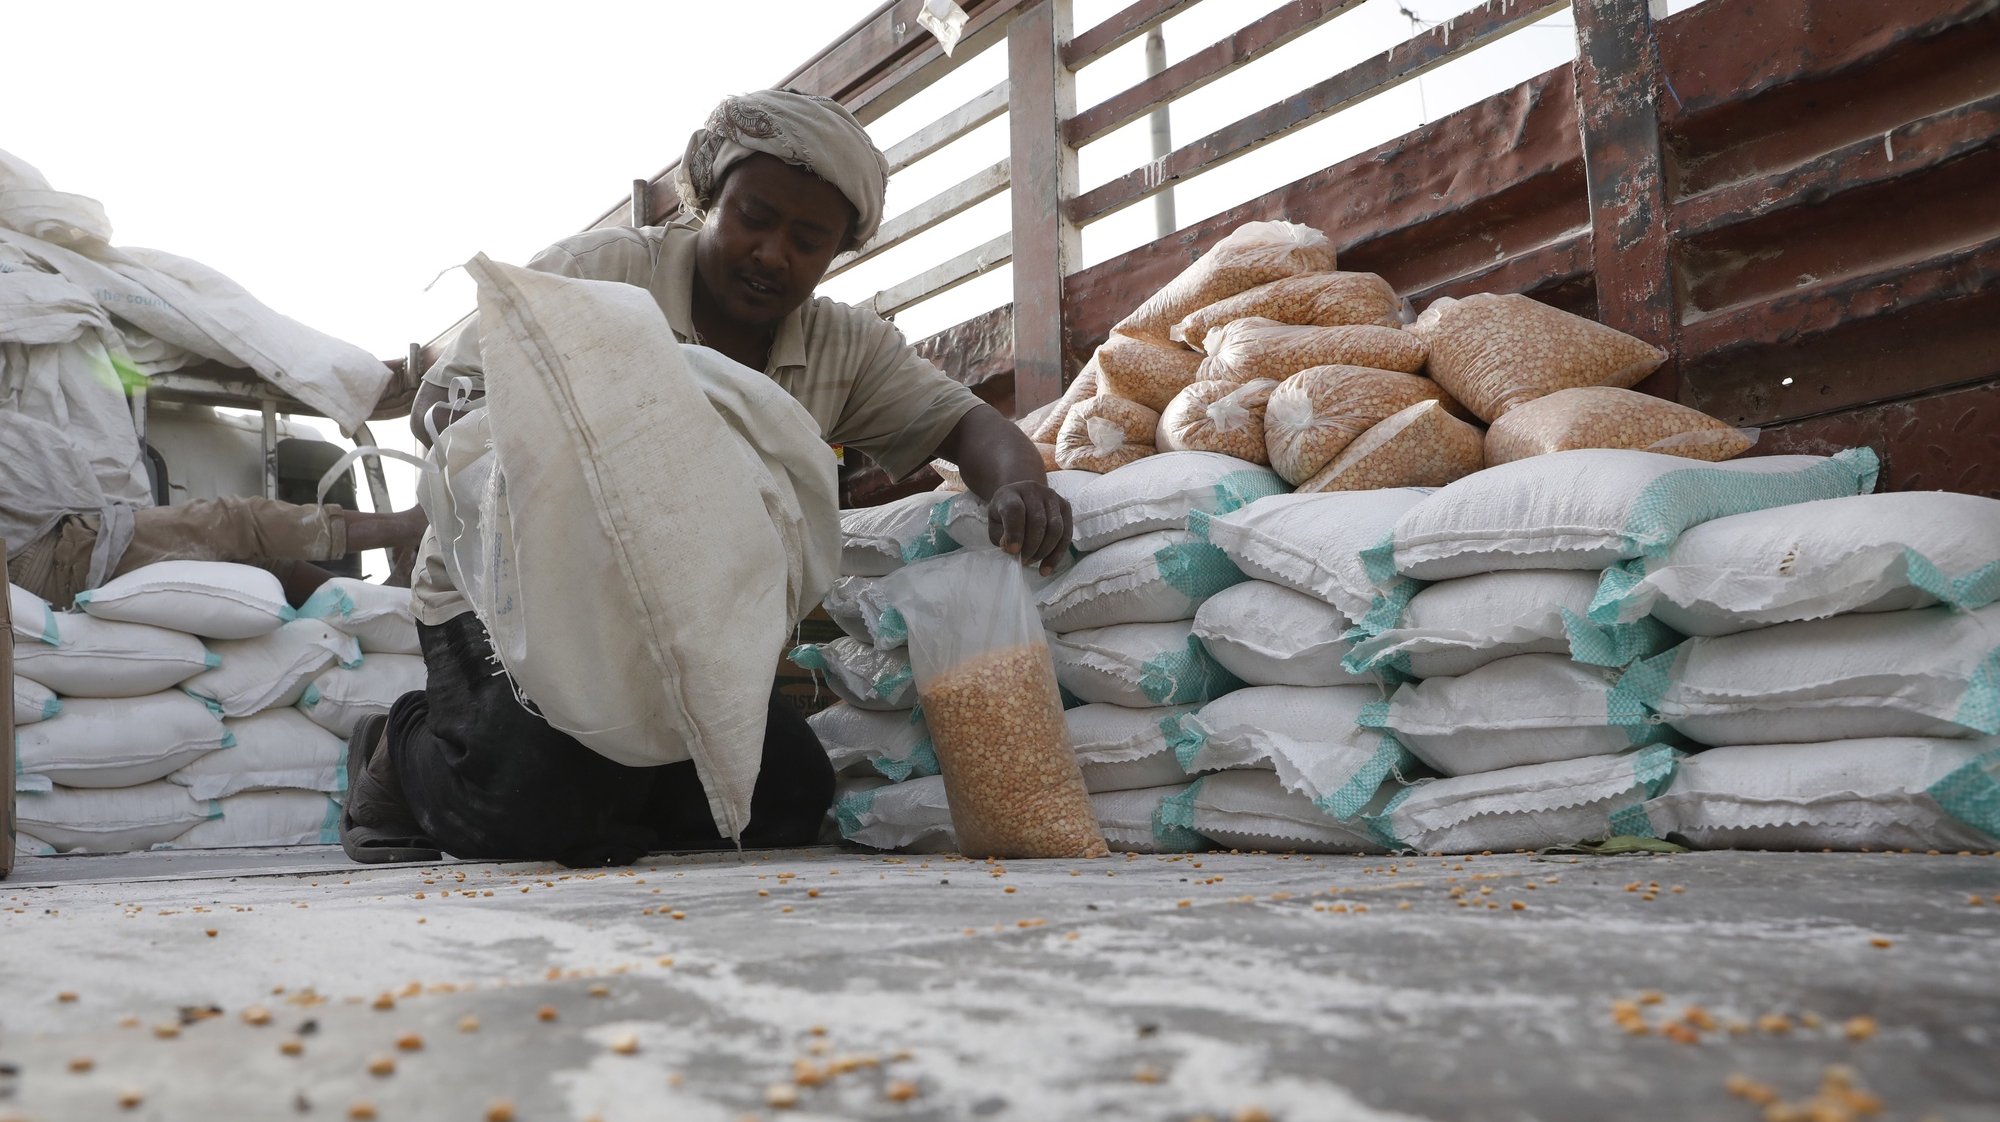 epa09751617 An aid worker prepares bags of beans during a food aid distribution amid a severe food insecurity, at al-Jarahi town, in the port province of Hodeidah, Yemen, 10 February 2022 (Issued 13 February 2022). The United Nations has reported that the humanitarian response plan for Yemen for 2021 received only 58 percent of the funding requirements, with a deficit of about 1.6 billion US dollar, as some 24 million people, out of the war-ridden country&#039;s 30 million population, are urgently in need of protection and humanitarian assistance, including over five million people are on the brink of famine. Aid agencies suspended vital relief programs in impoverished Yemen as of January 2022 due to severe funding shortfalls. Yemen has been mired in a war since the Houthis ousted the internationally recognised government from the capital Sana&#039;a in late 2014, leaving millions suffering from food and medical shortages. The conflict escalated when the Saudi-UAE led coalition intervened to back the government forces in March 2015.  EPA/YAHYA ARHAB